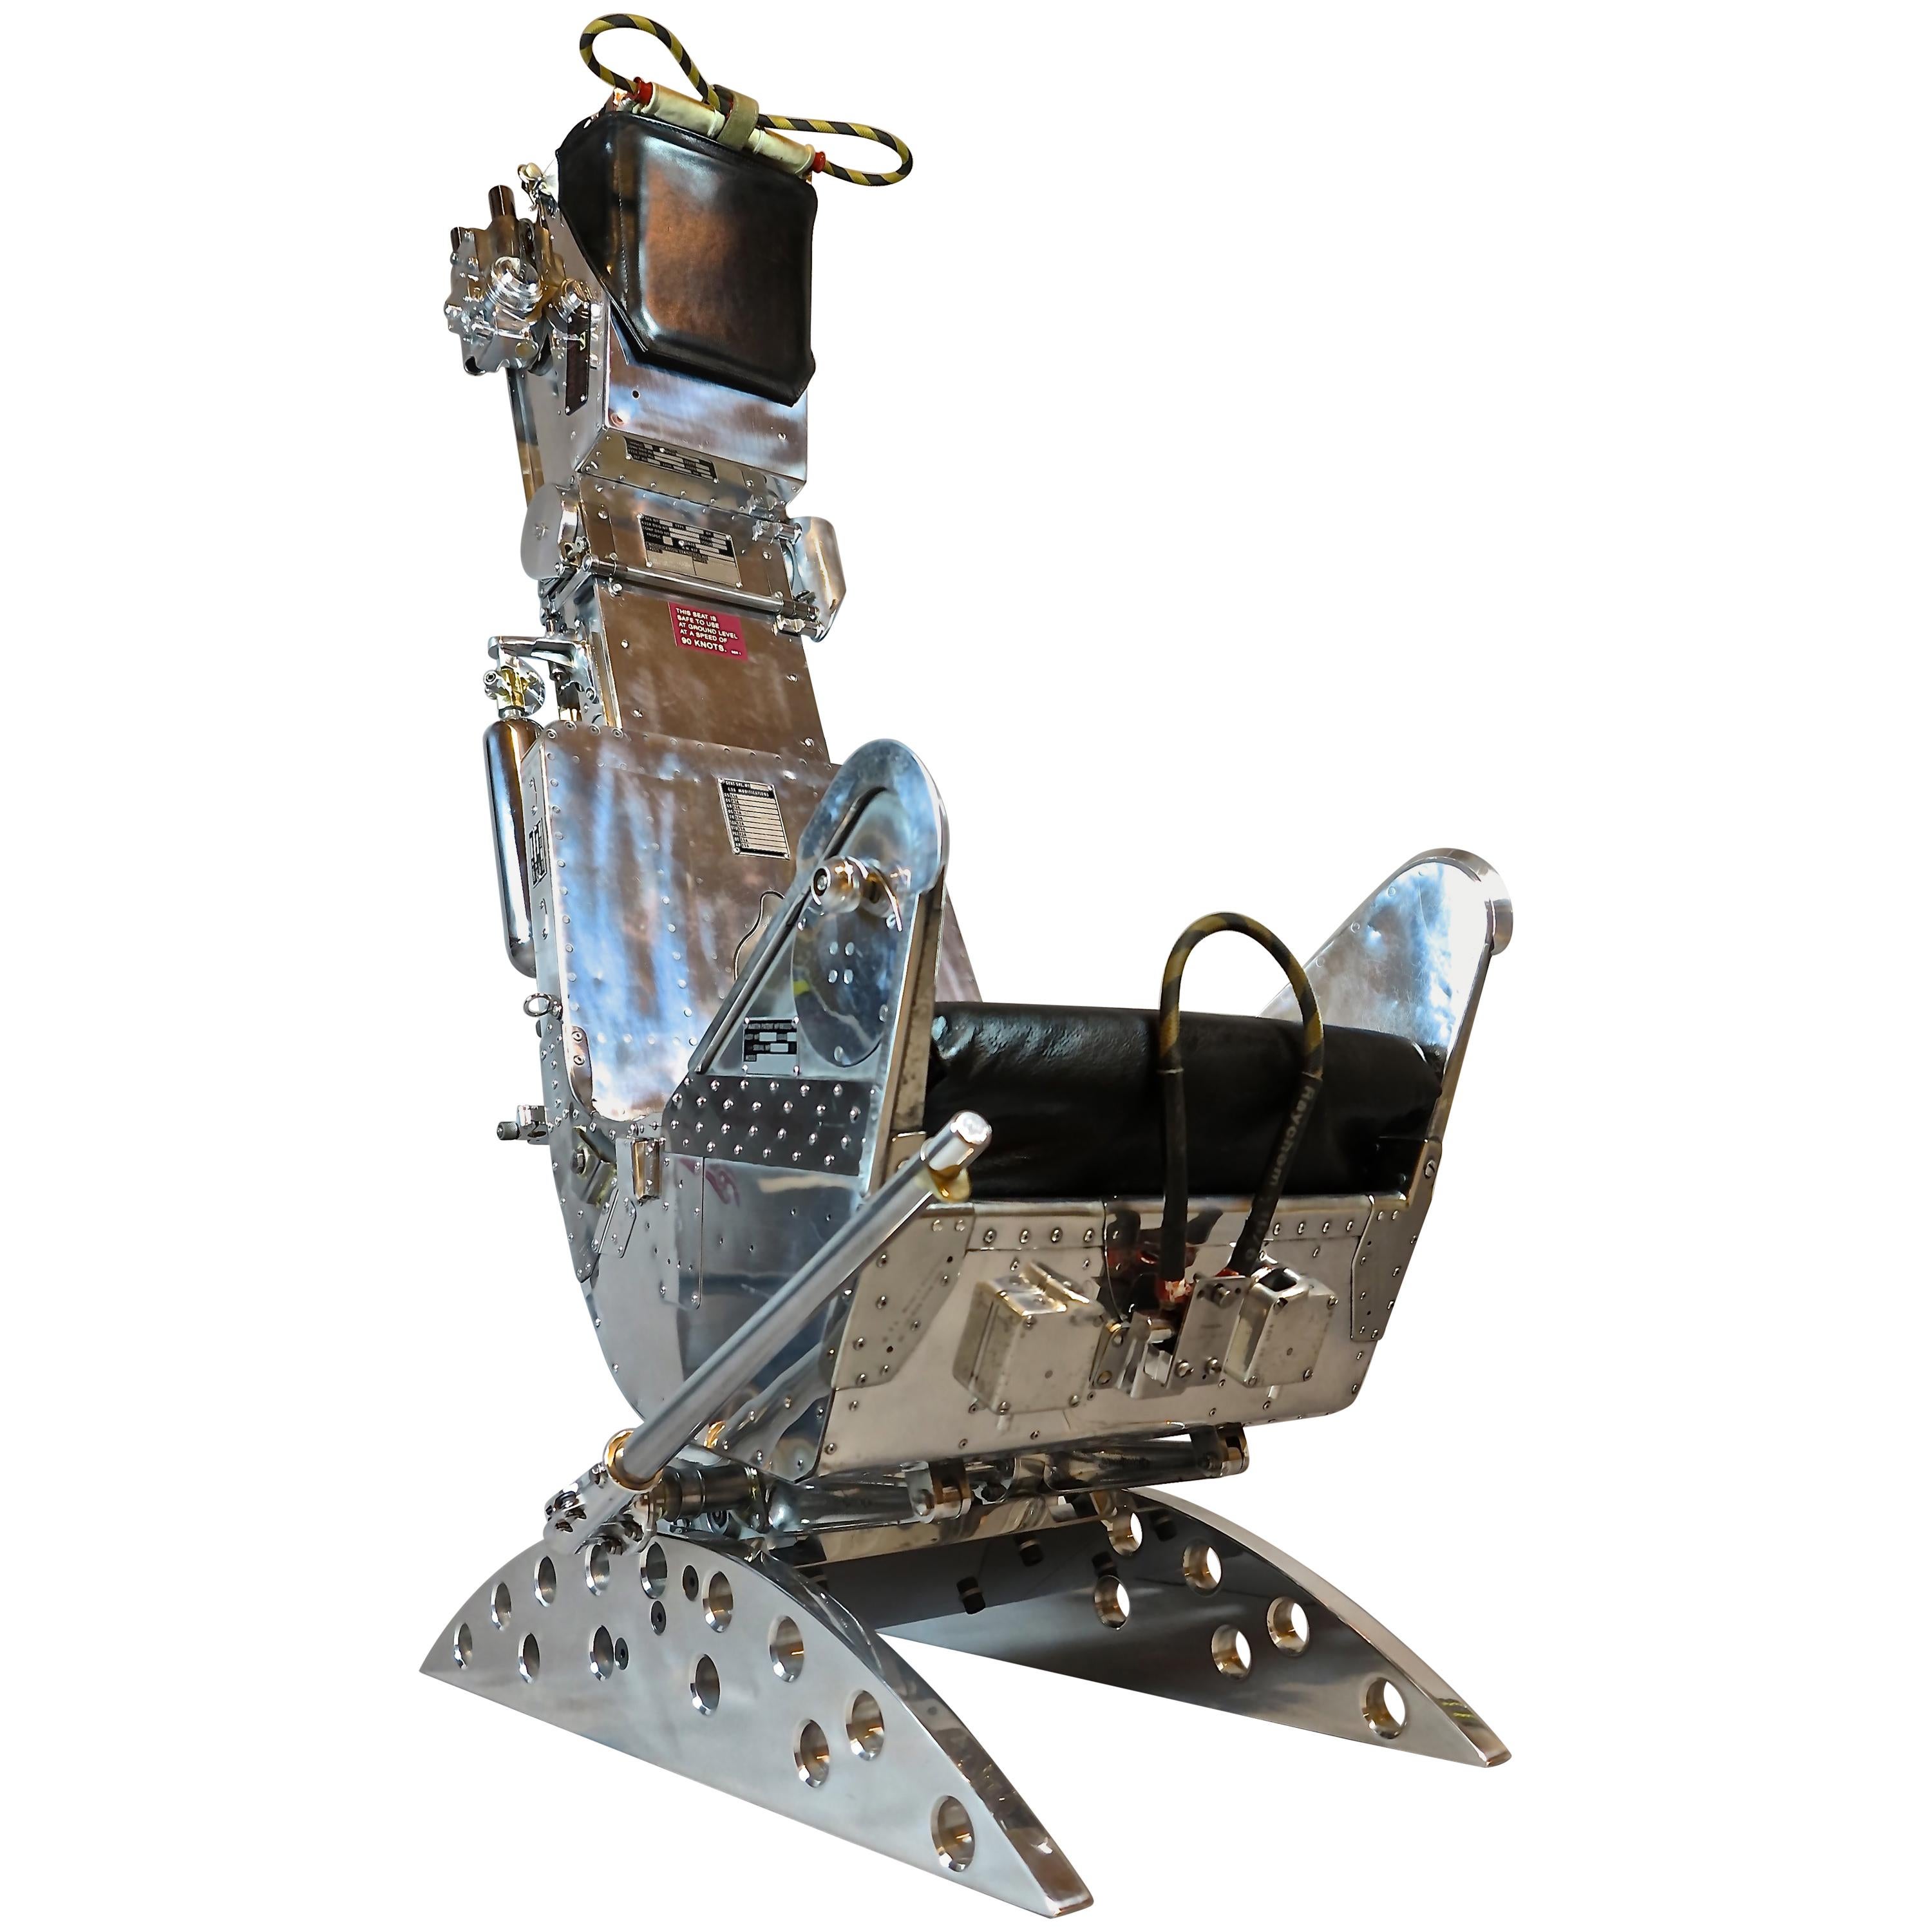 Martin Baker Canberra Ejection Seat For Sale